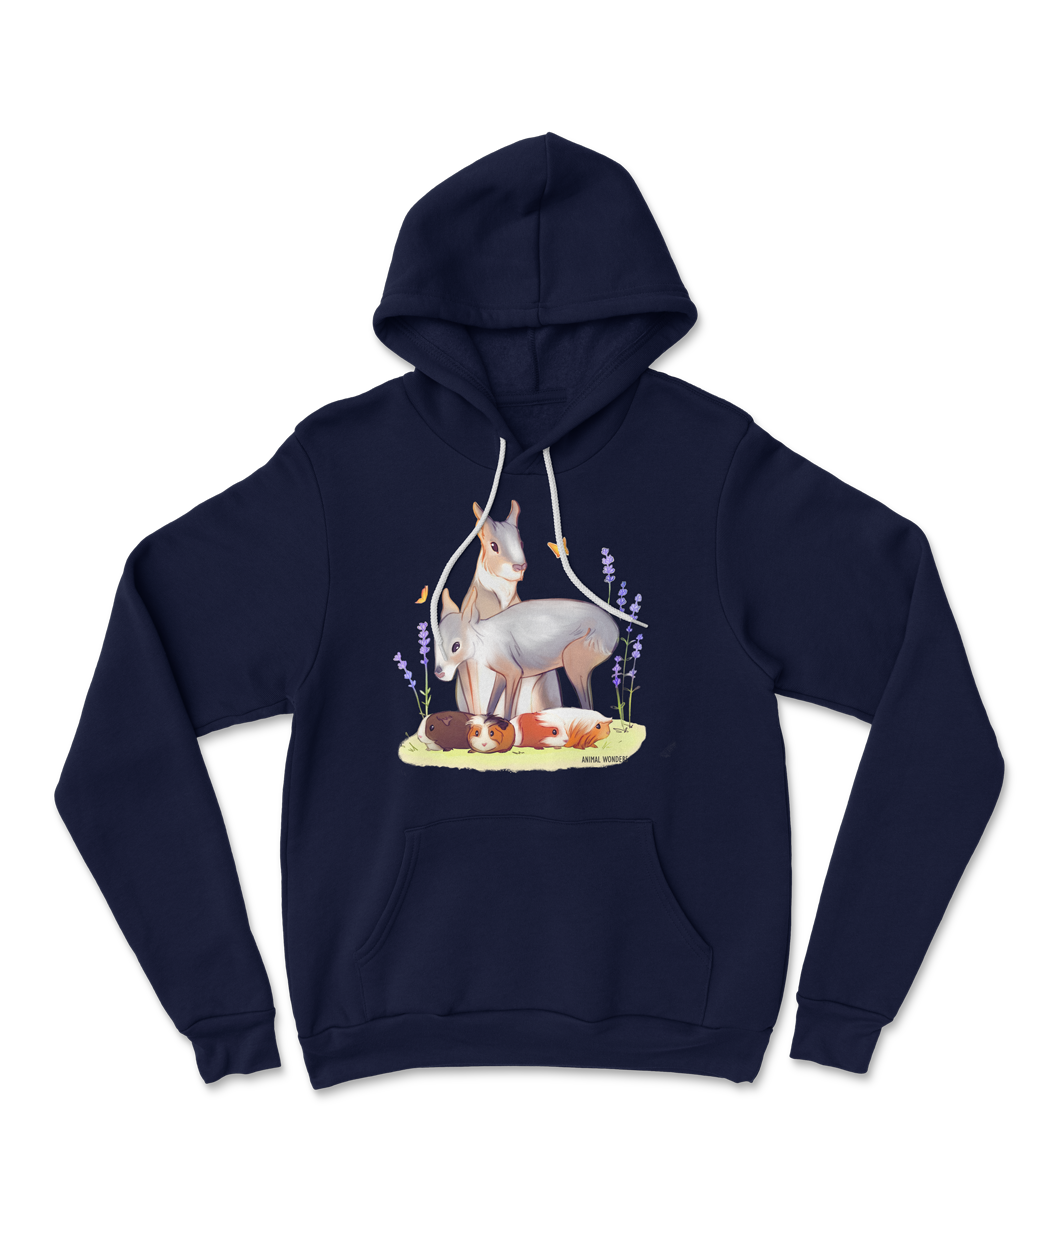 A dark blue, drawstring hoodie from Animal Wonders with an illustration of two Patagonian cavies standing over four guinea pigs.